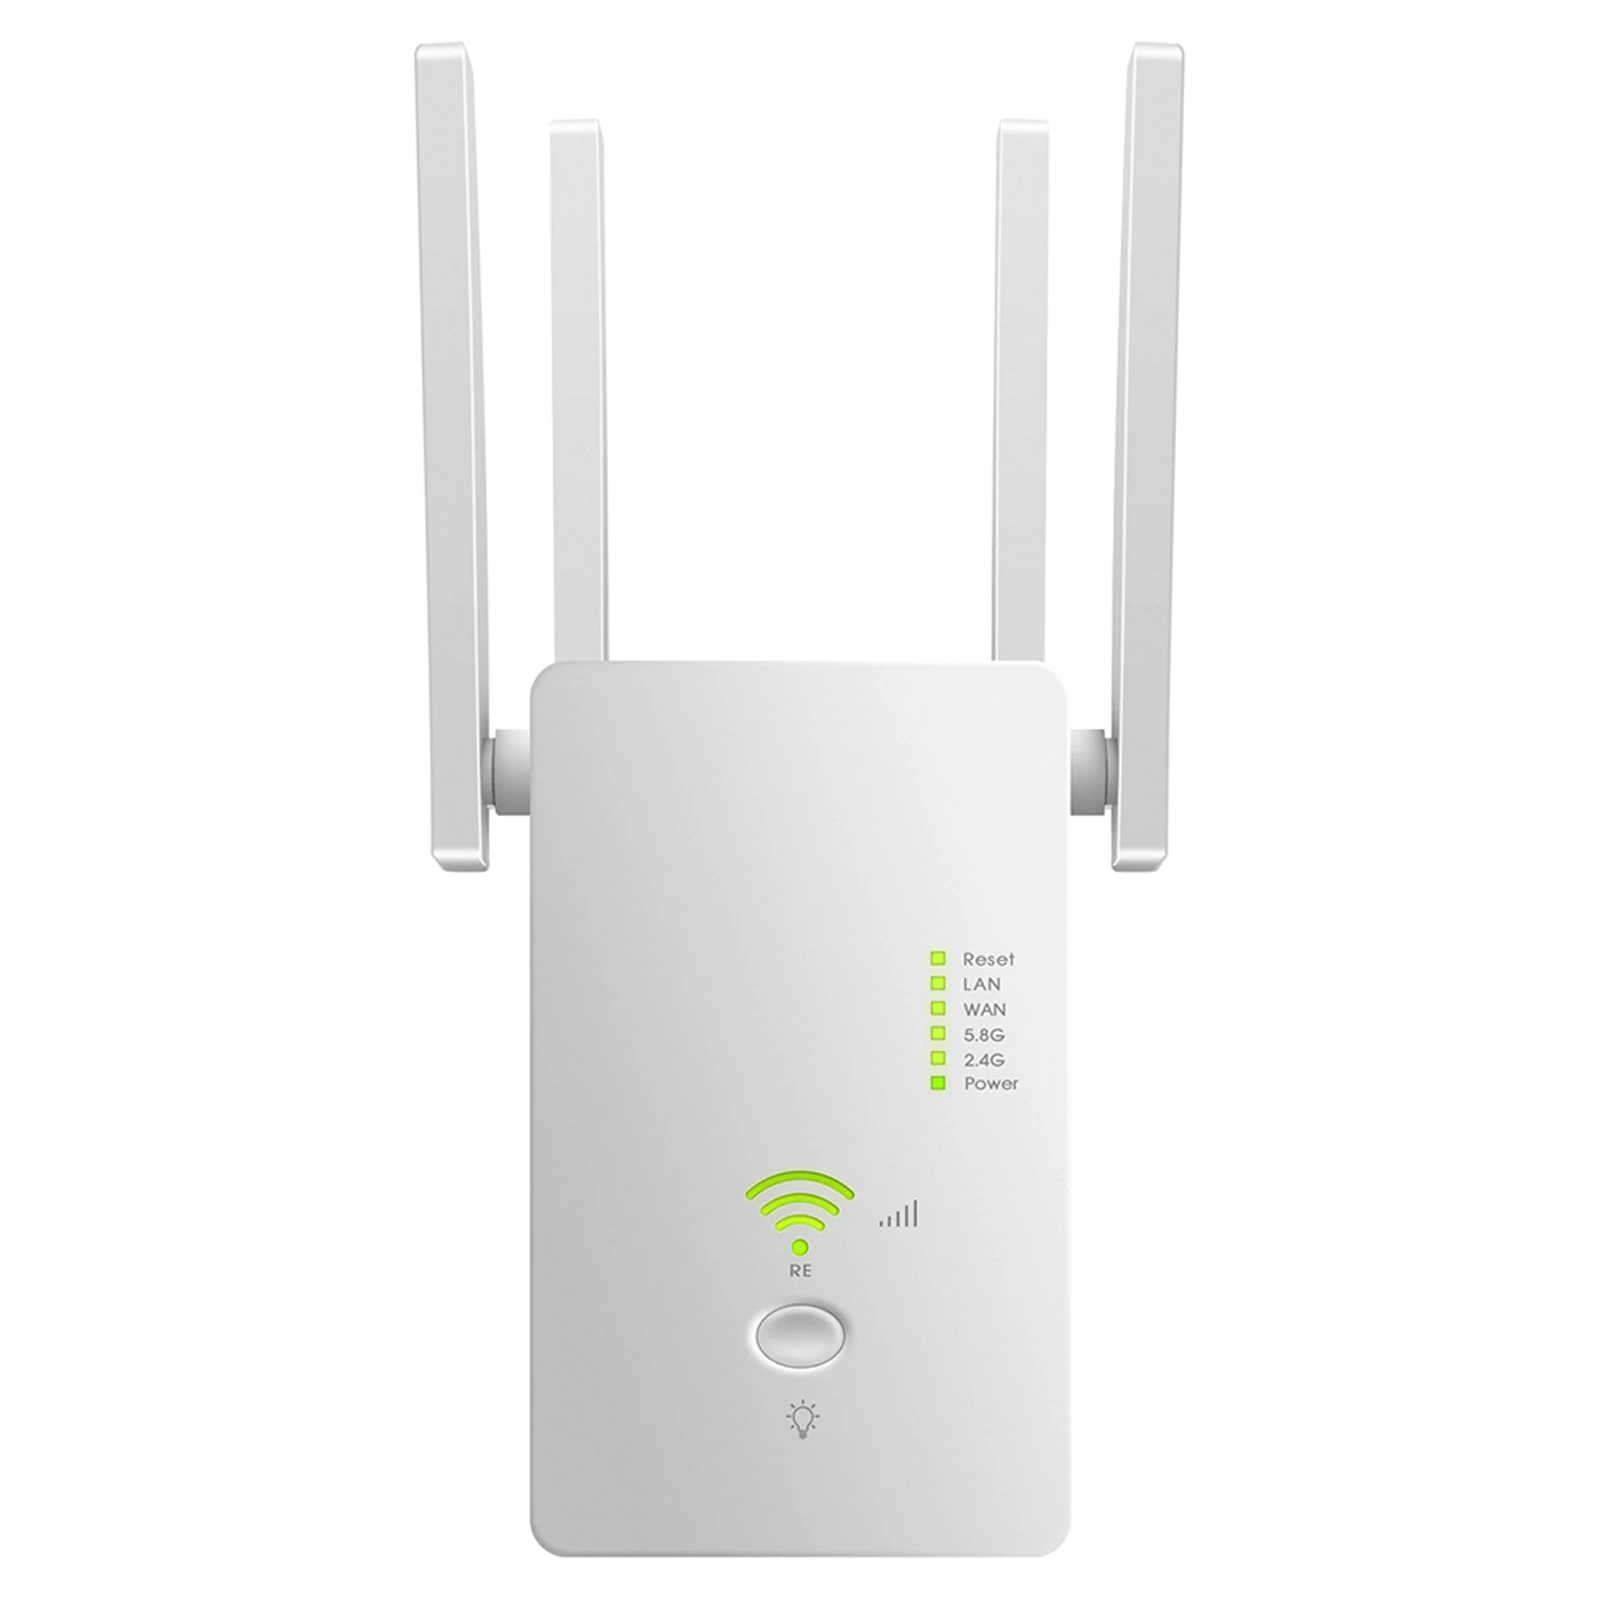 

Repeater Access Point Router Wireless Signal Booster 5G 1200Mbps Home AP WiFi Range Extender Long Distance Dual Band Easy Setup